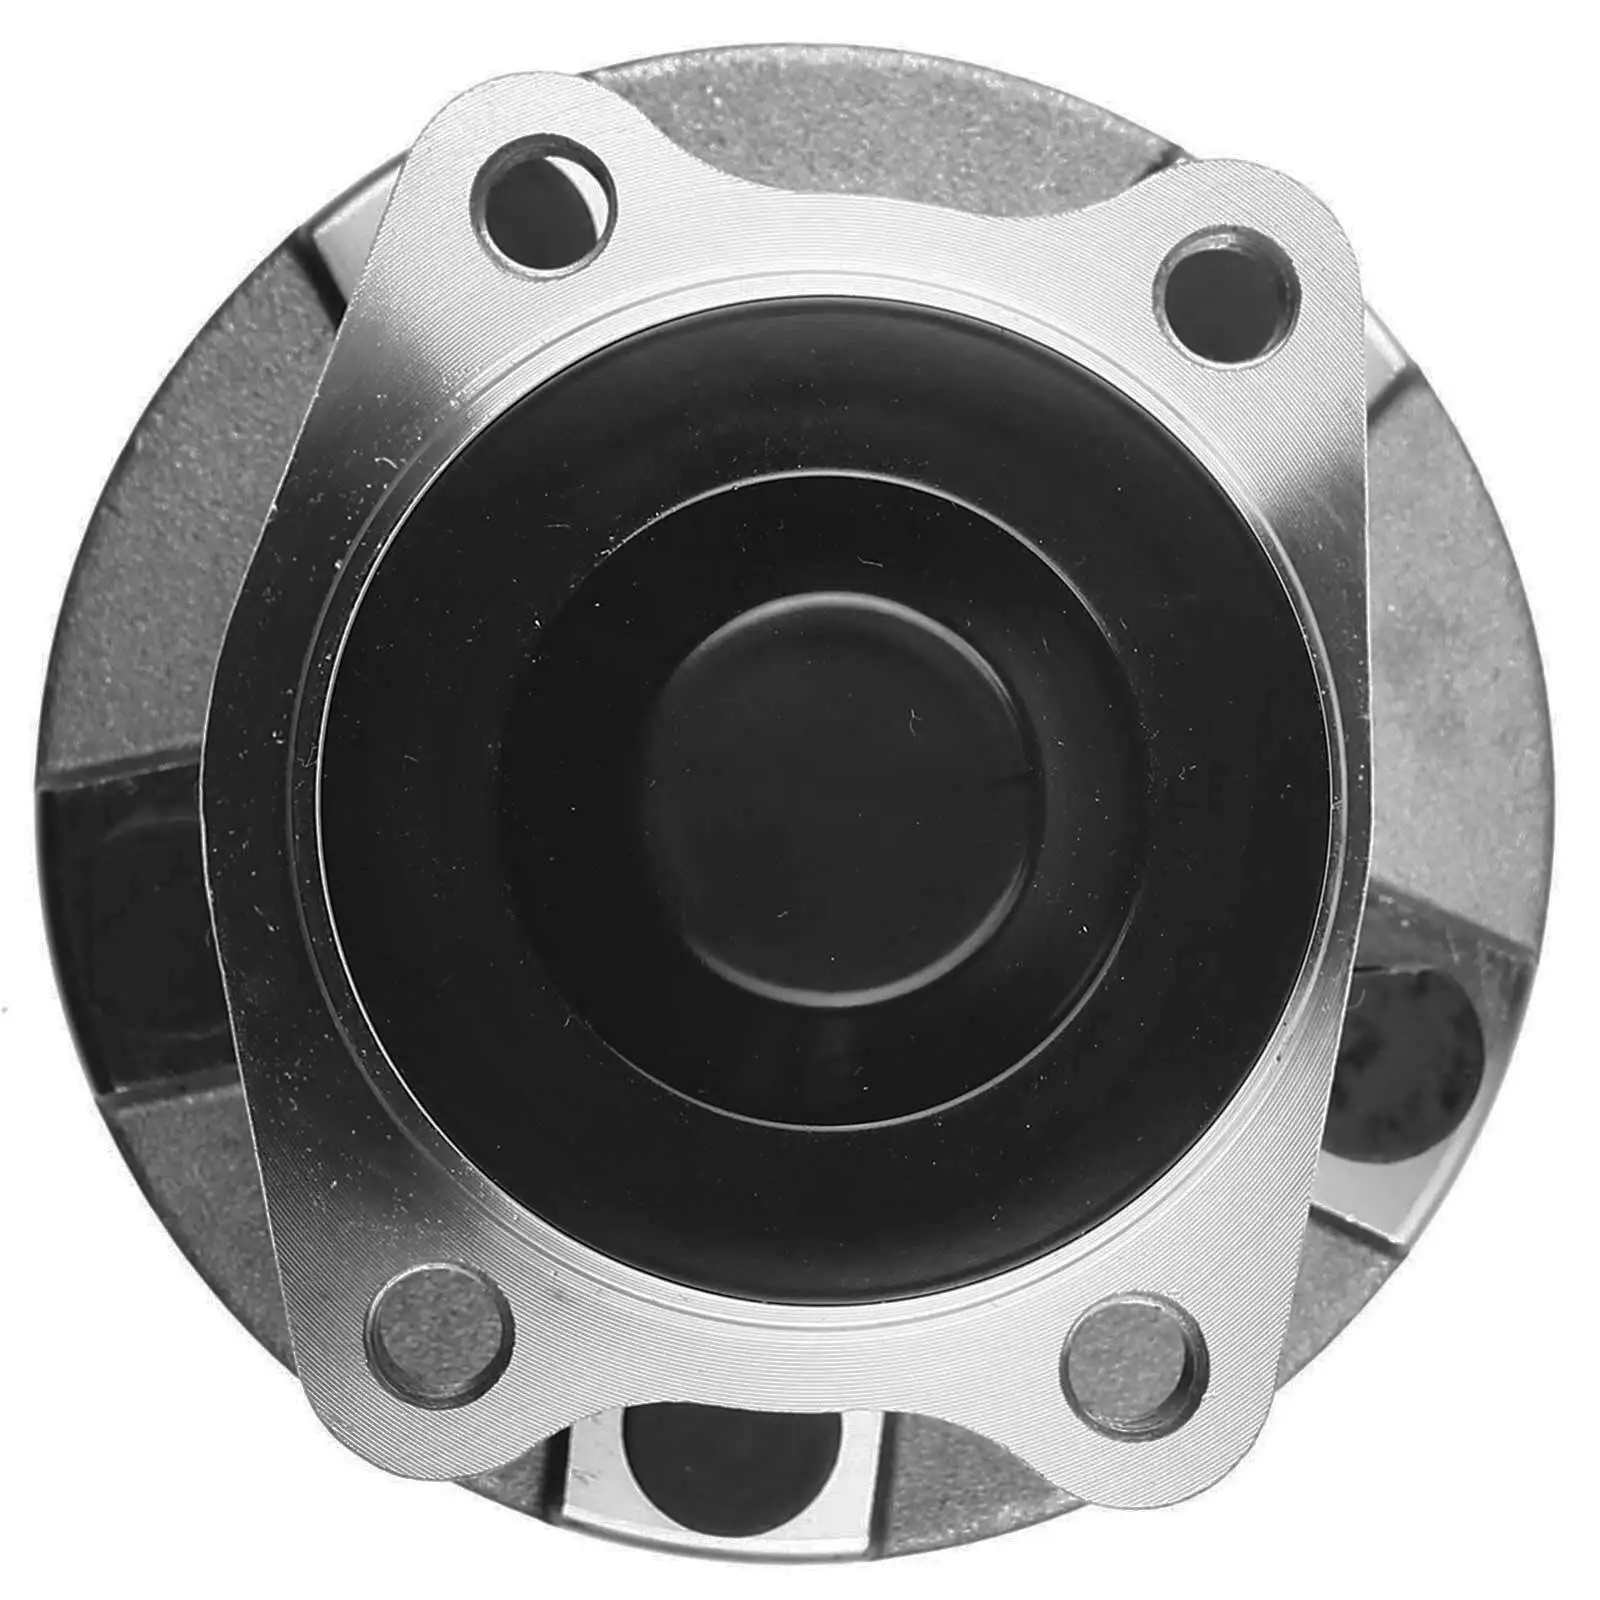 

A3 Automobile Wheel Hub Bearing Assembly for Dodge Caravan Chrysler Town & Country Rear LH/RH